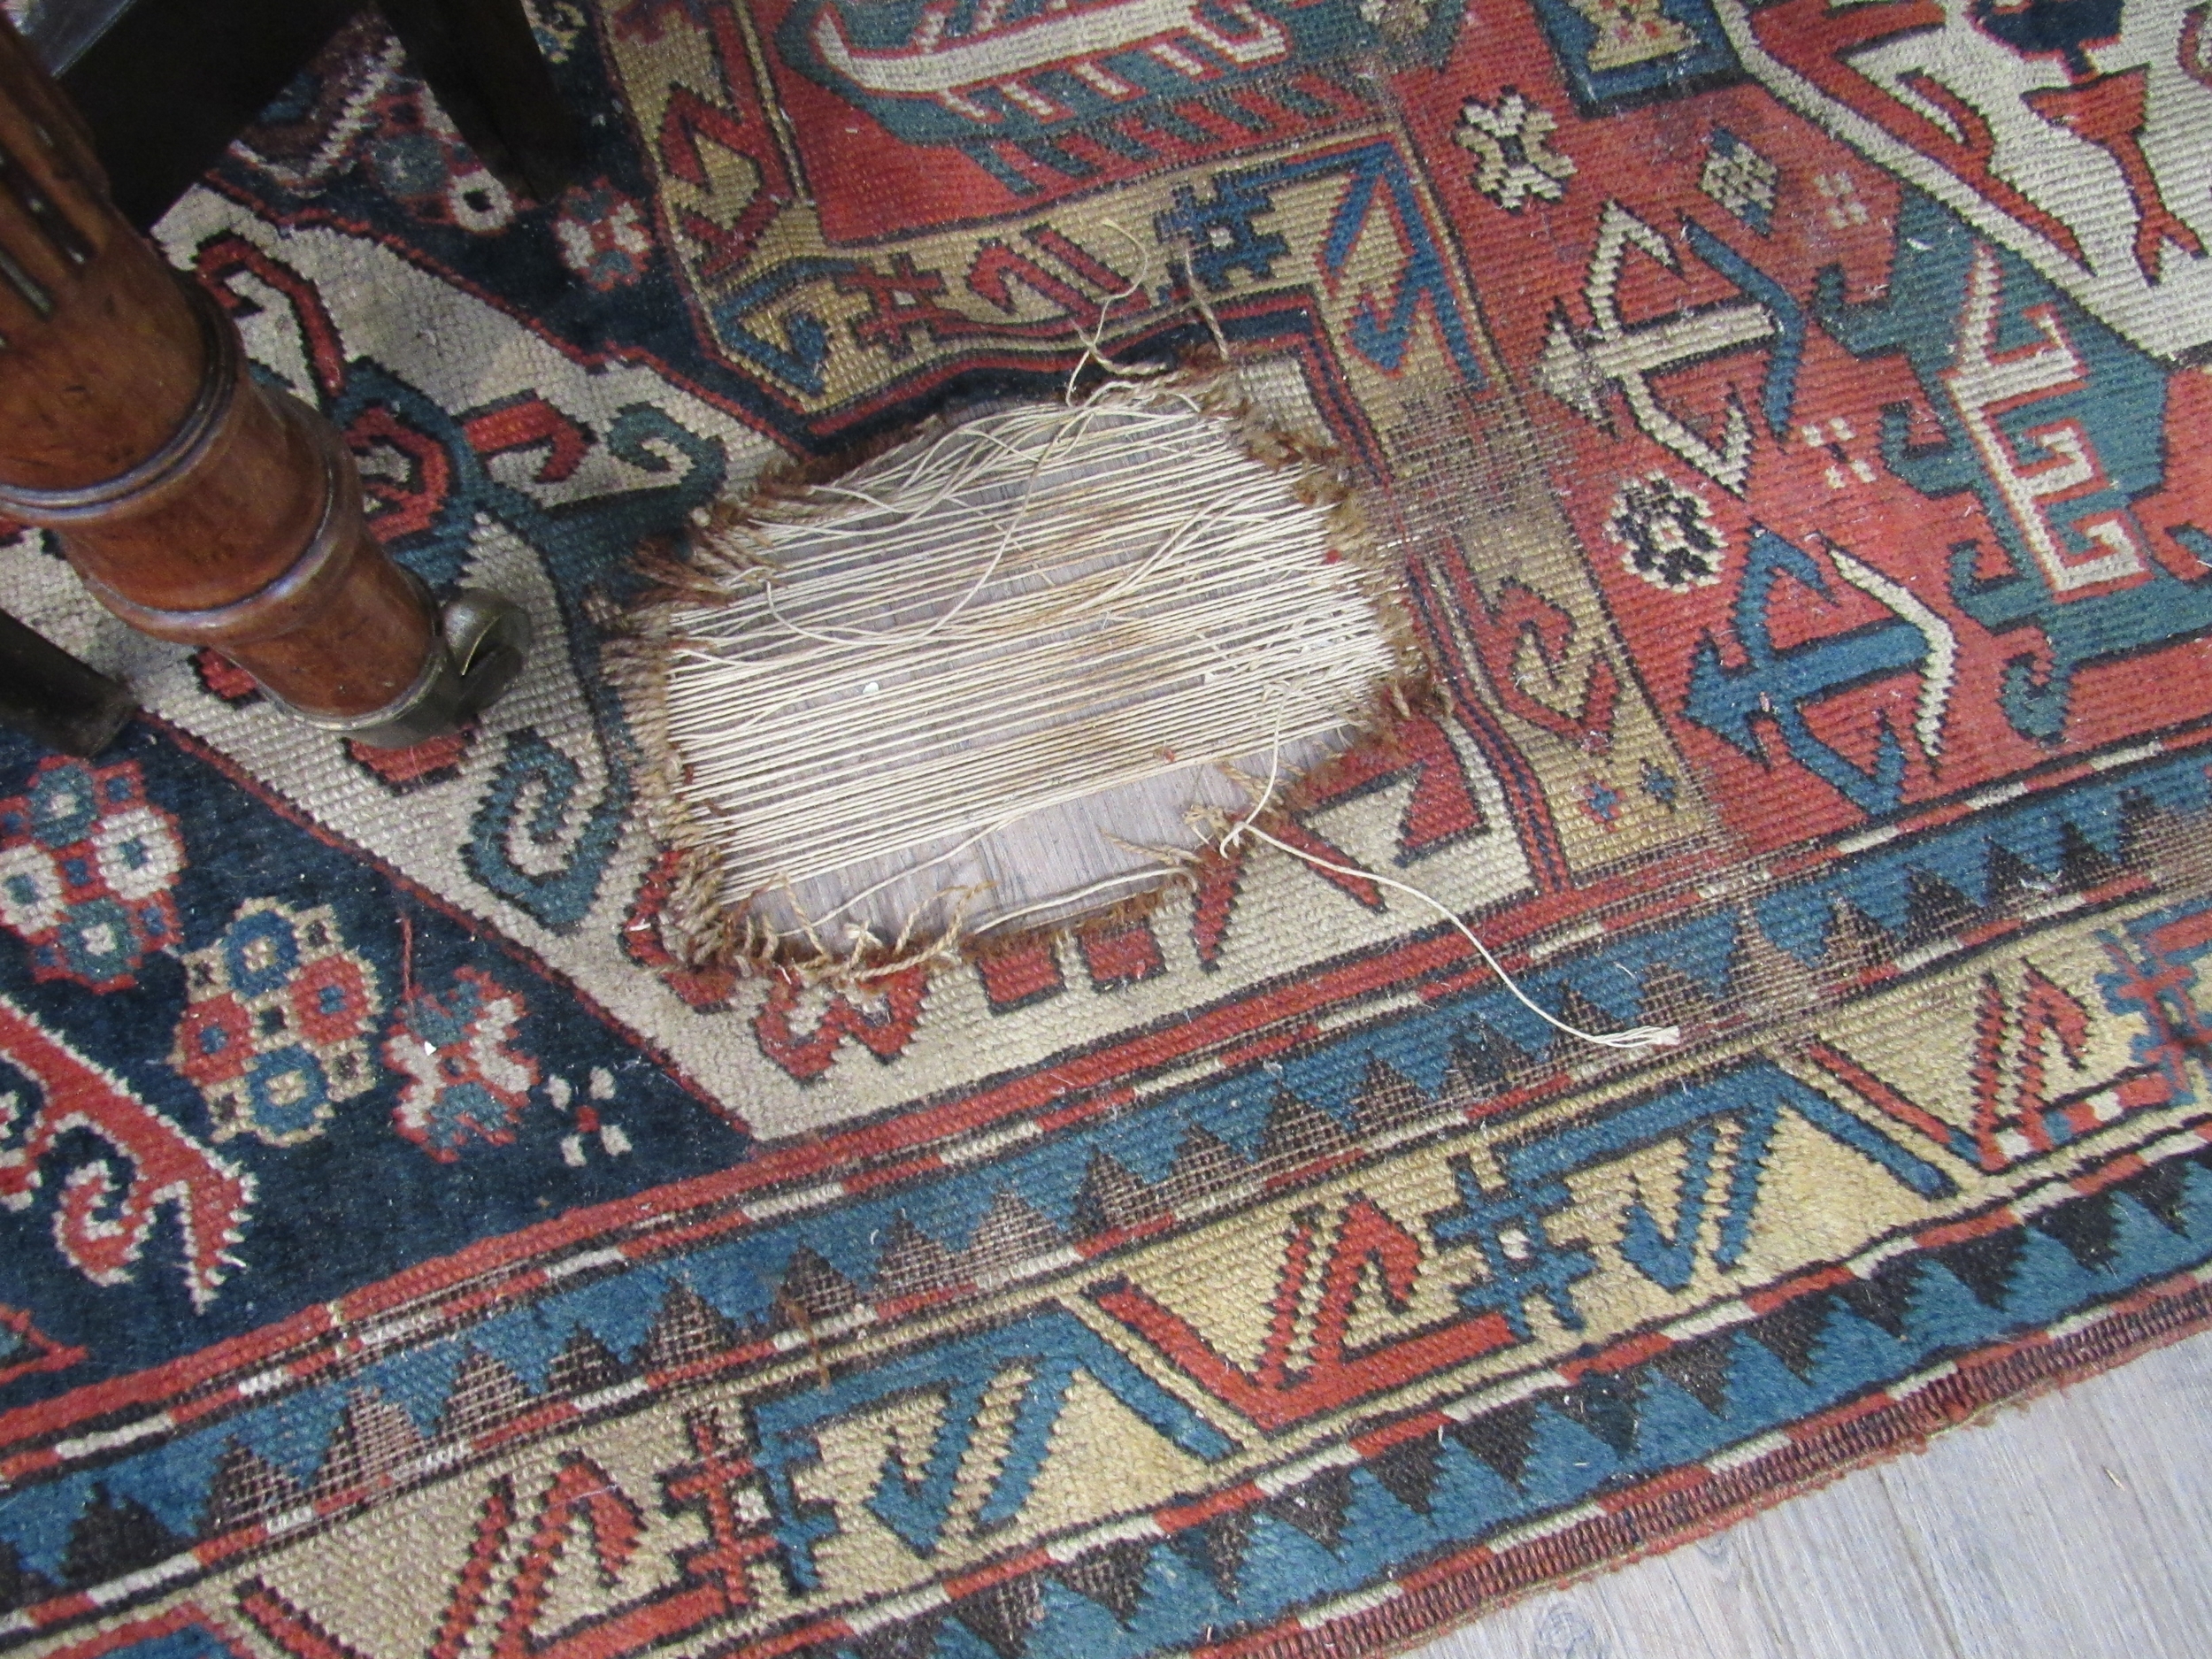 An early 20th Century hand woven Persian rug, badly worn, 230cm x 144cm - Image 2 of 2